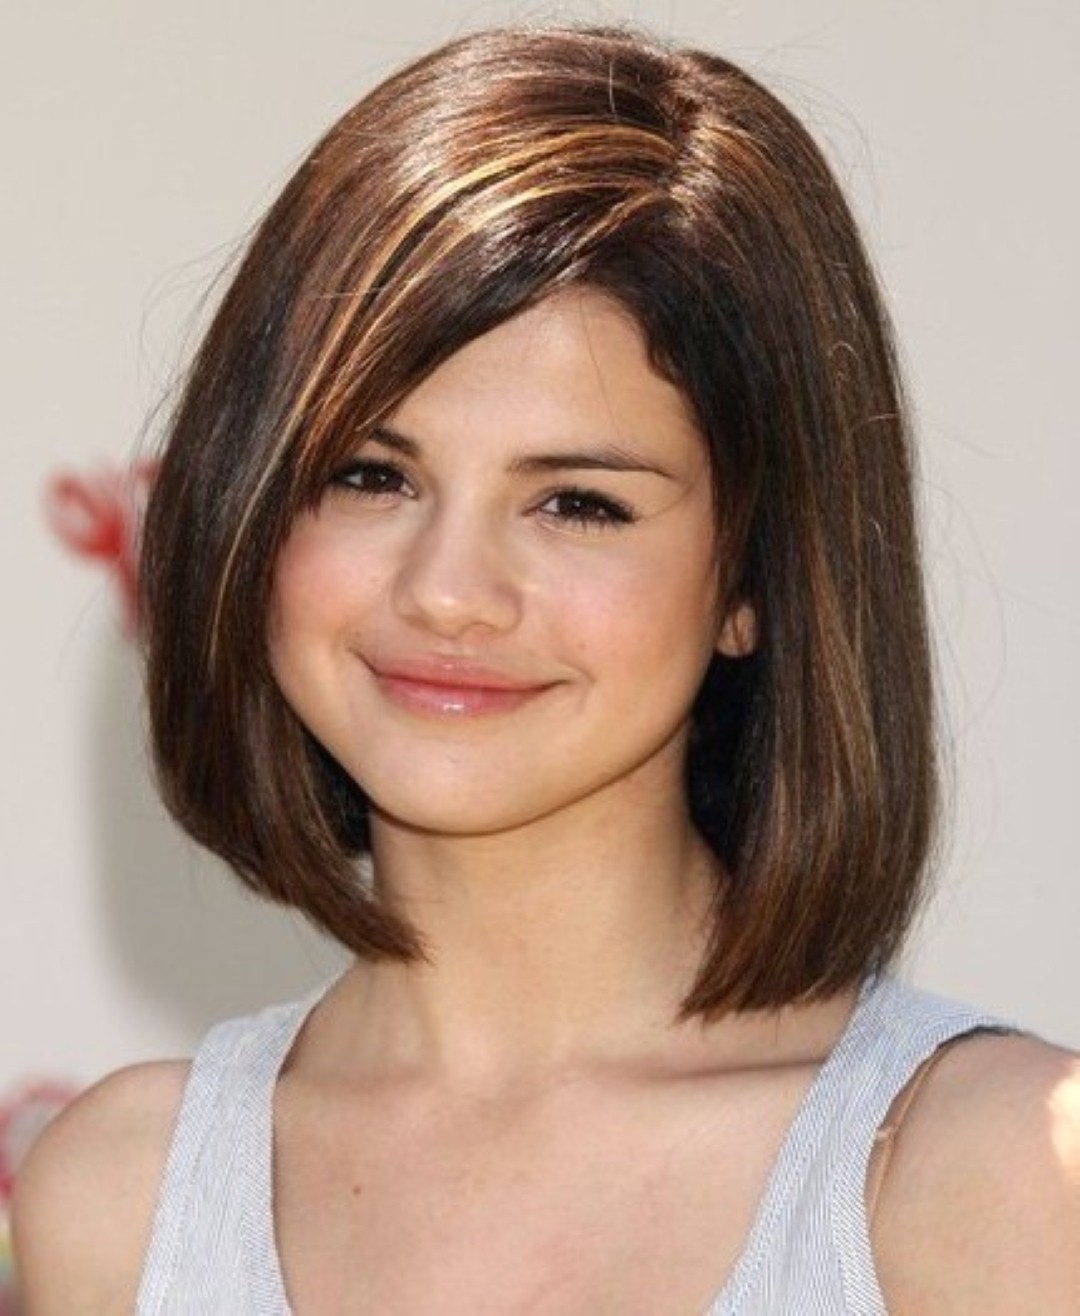 Short hairstyles for girls short-hairstyles-for-girls-84-5